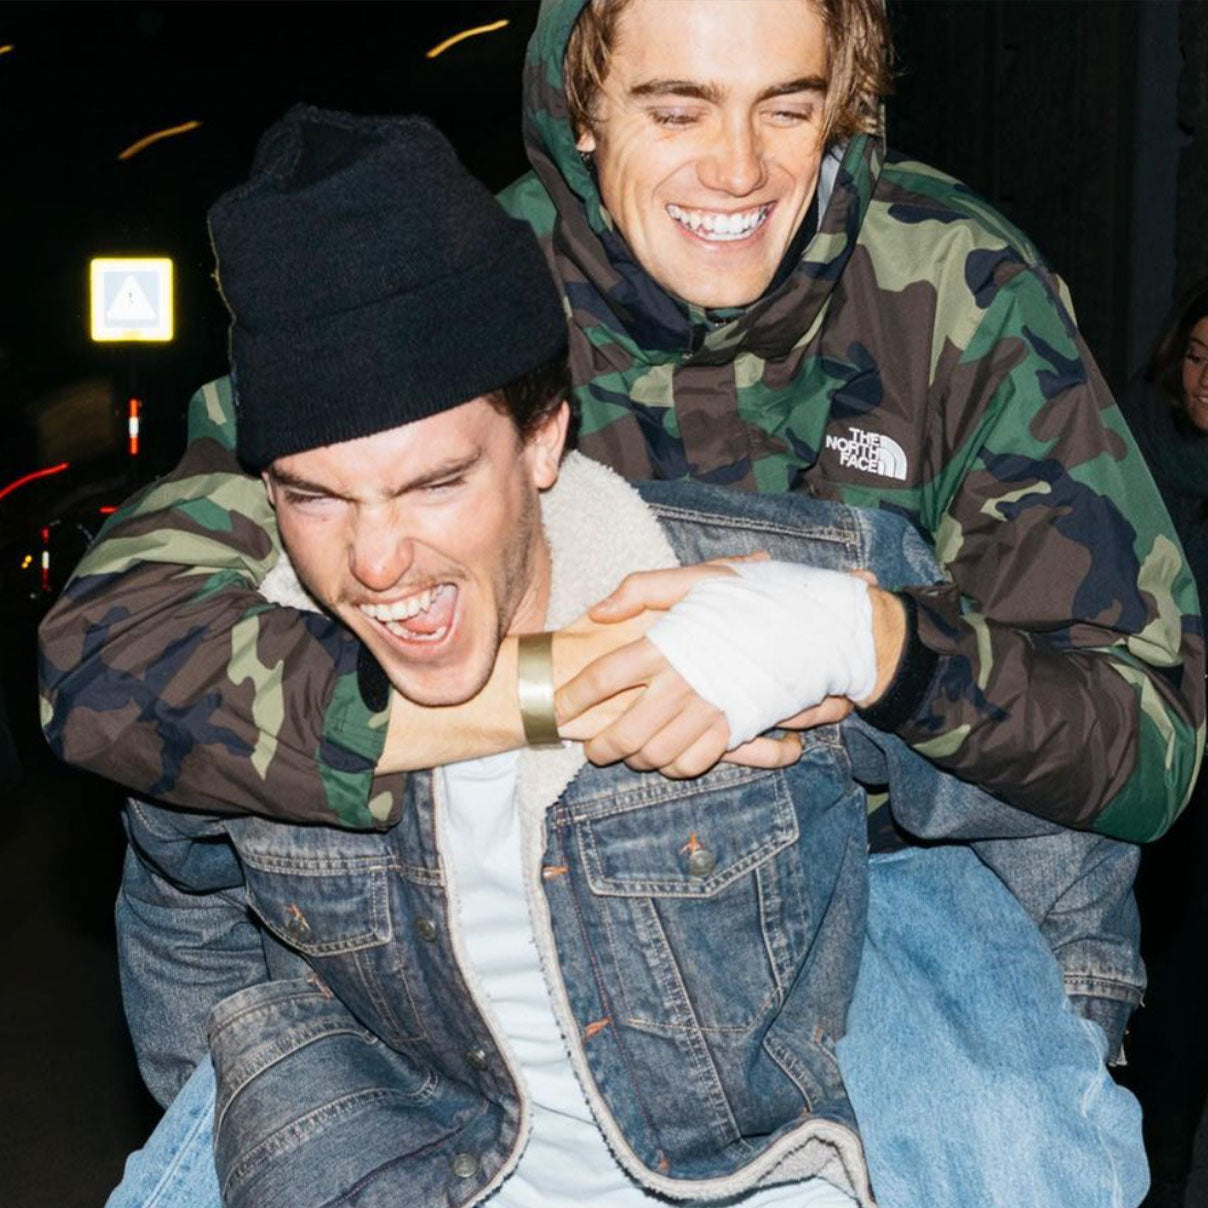 blake getting a piggy back ride from a friend during a Vans Snowboarding event